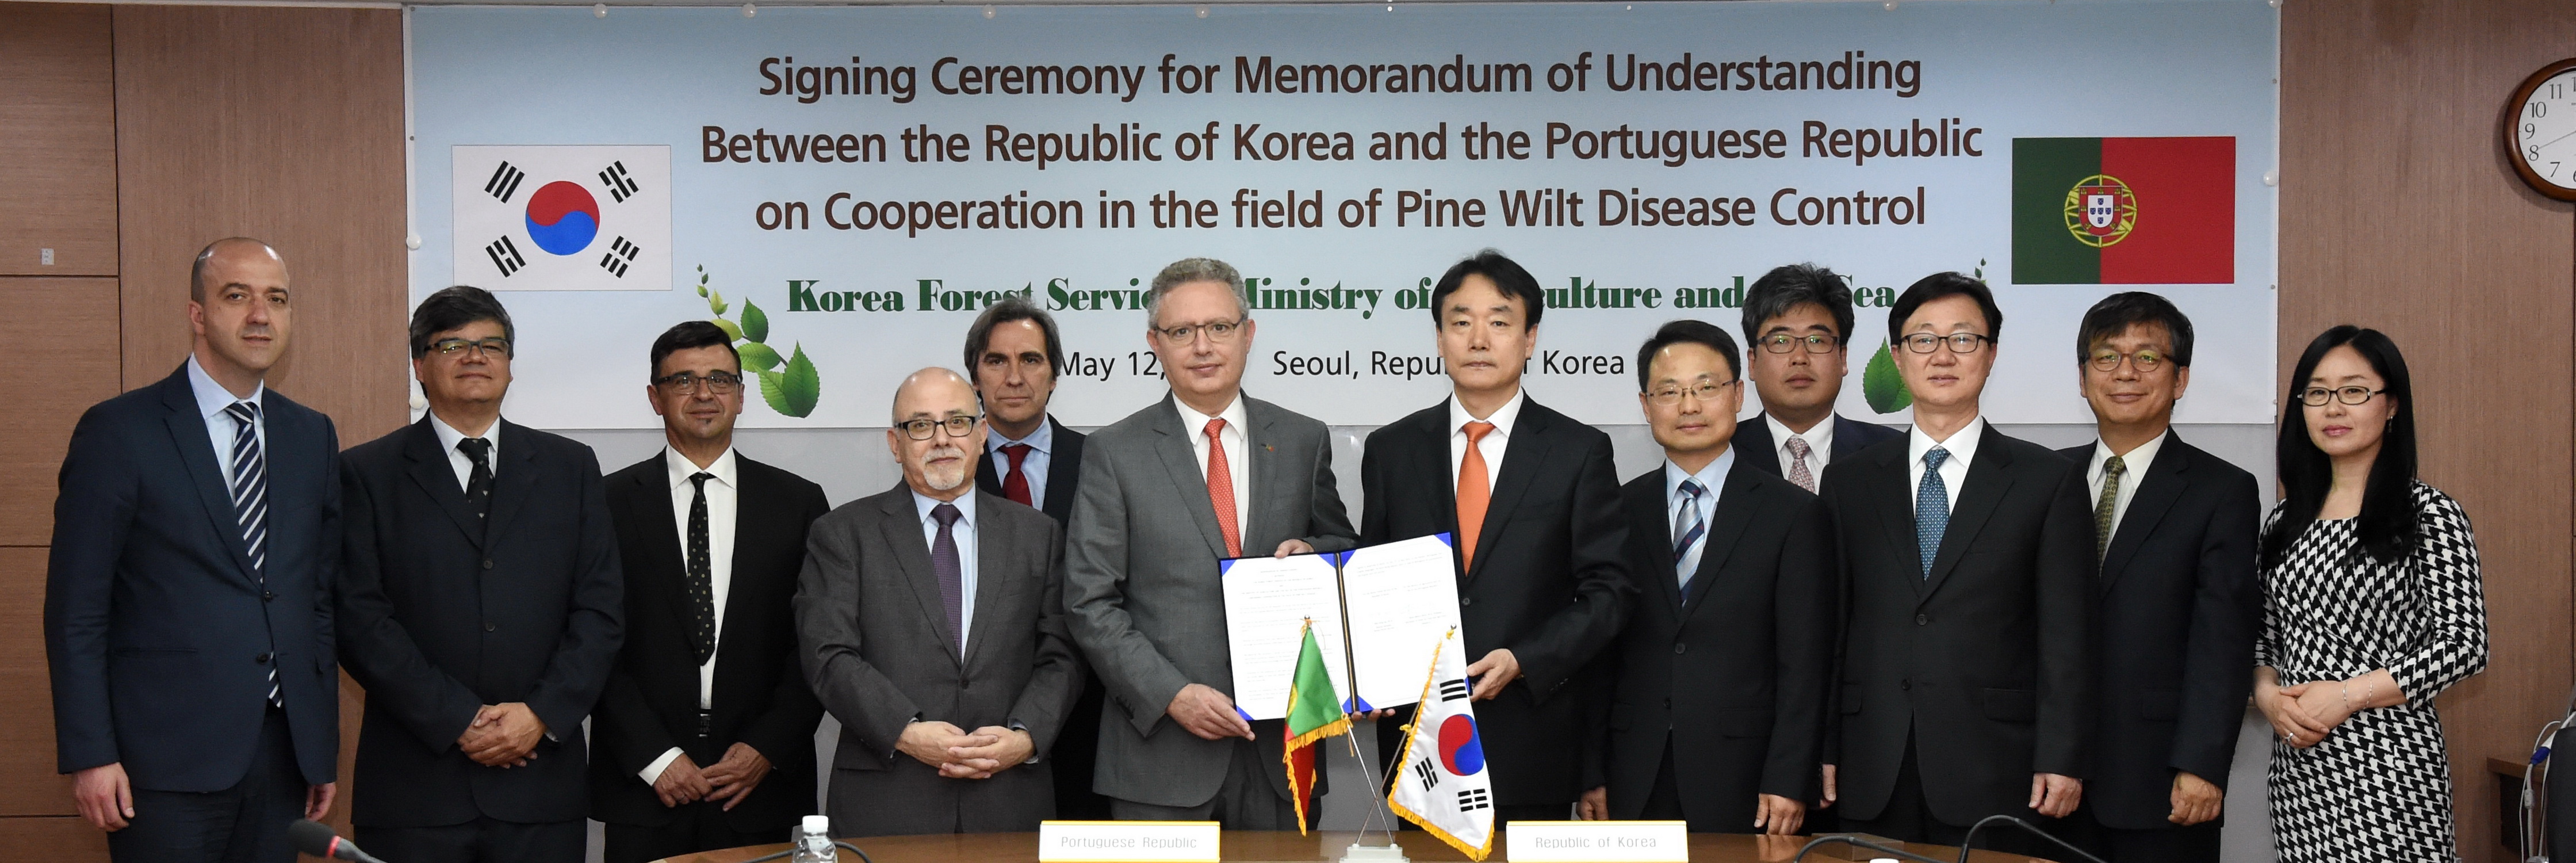 MOU with Portugal on Pine Wilt Disease Control 이미지2